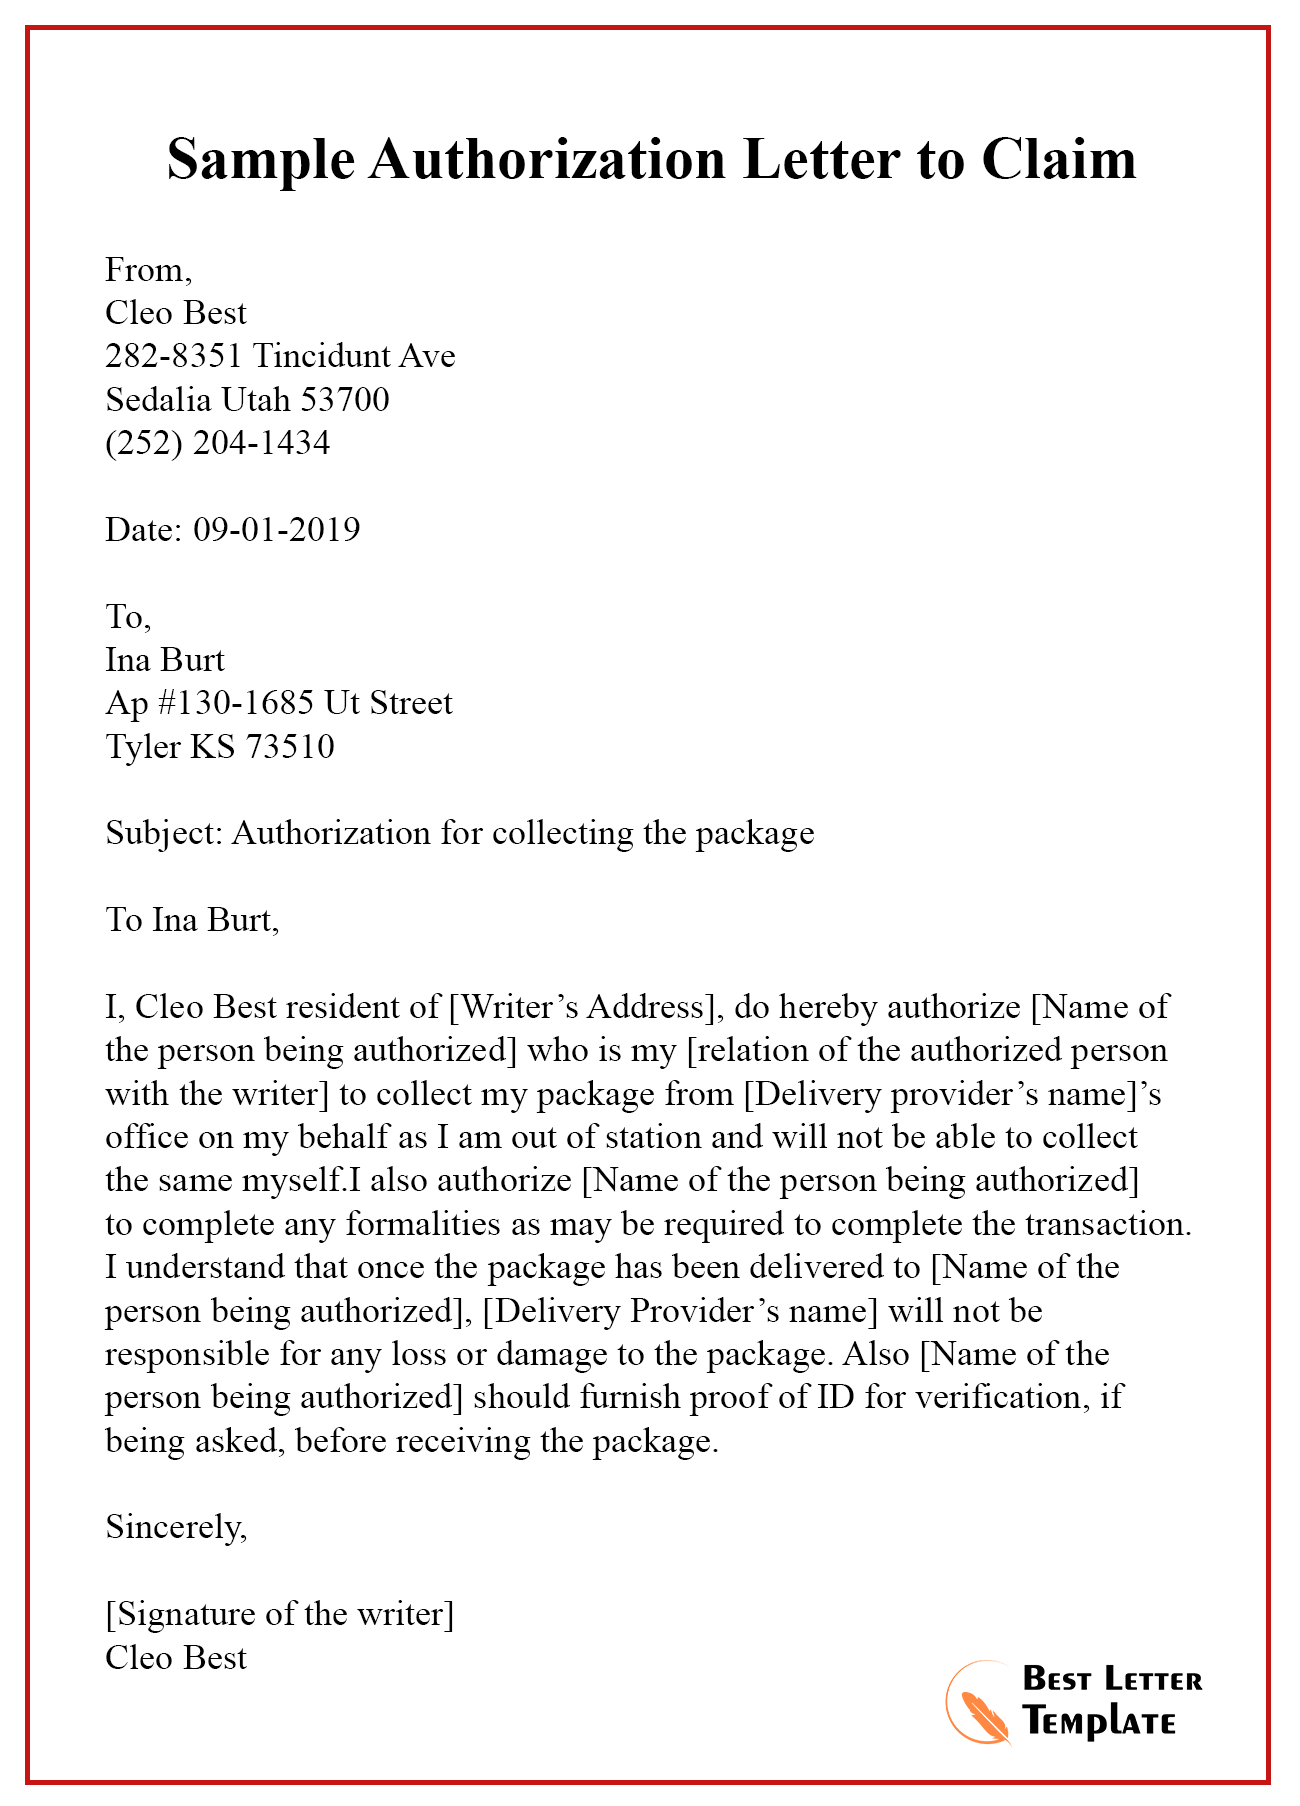 Authorization Letter to Claim